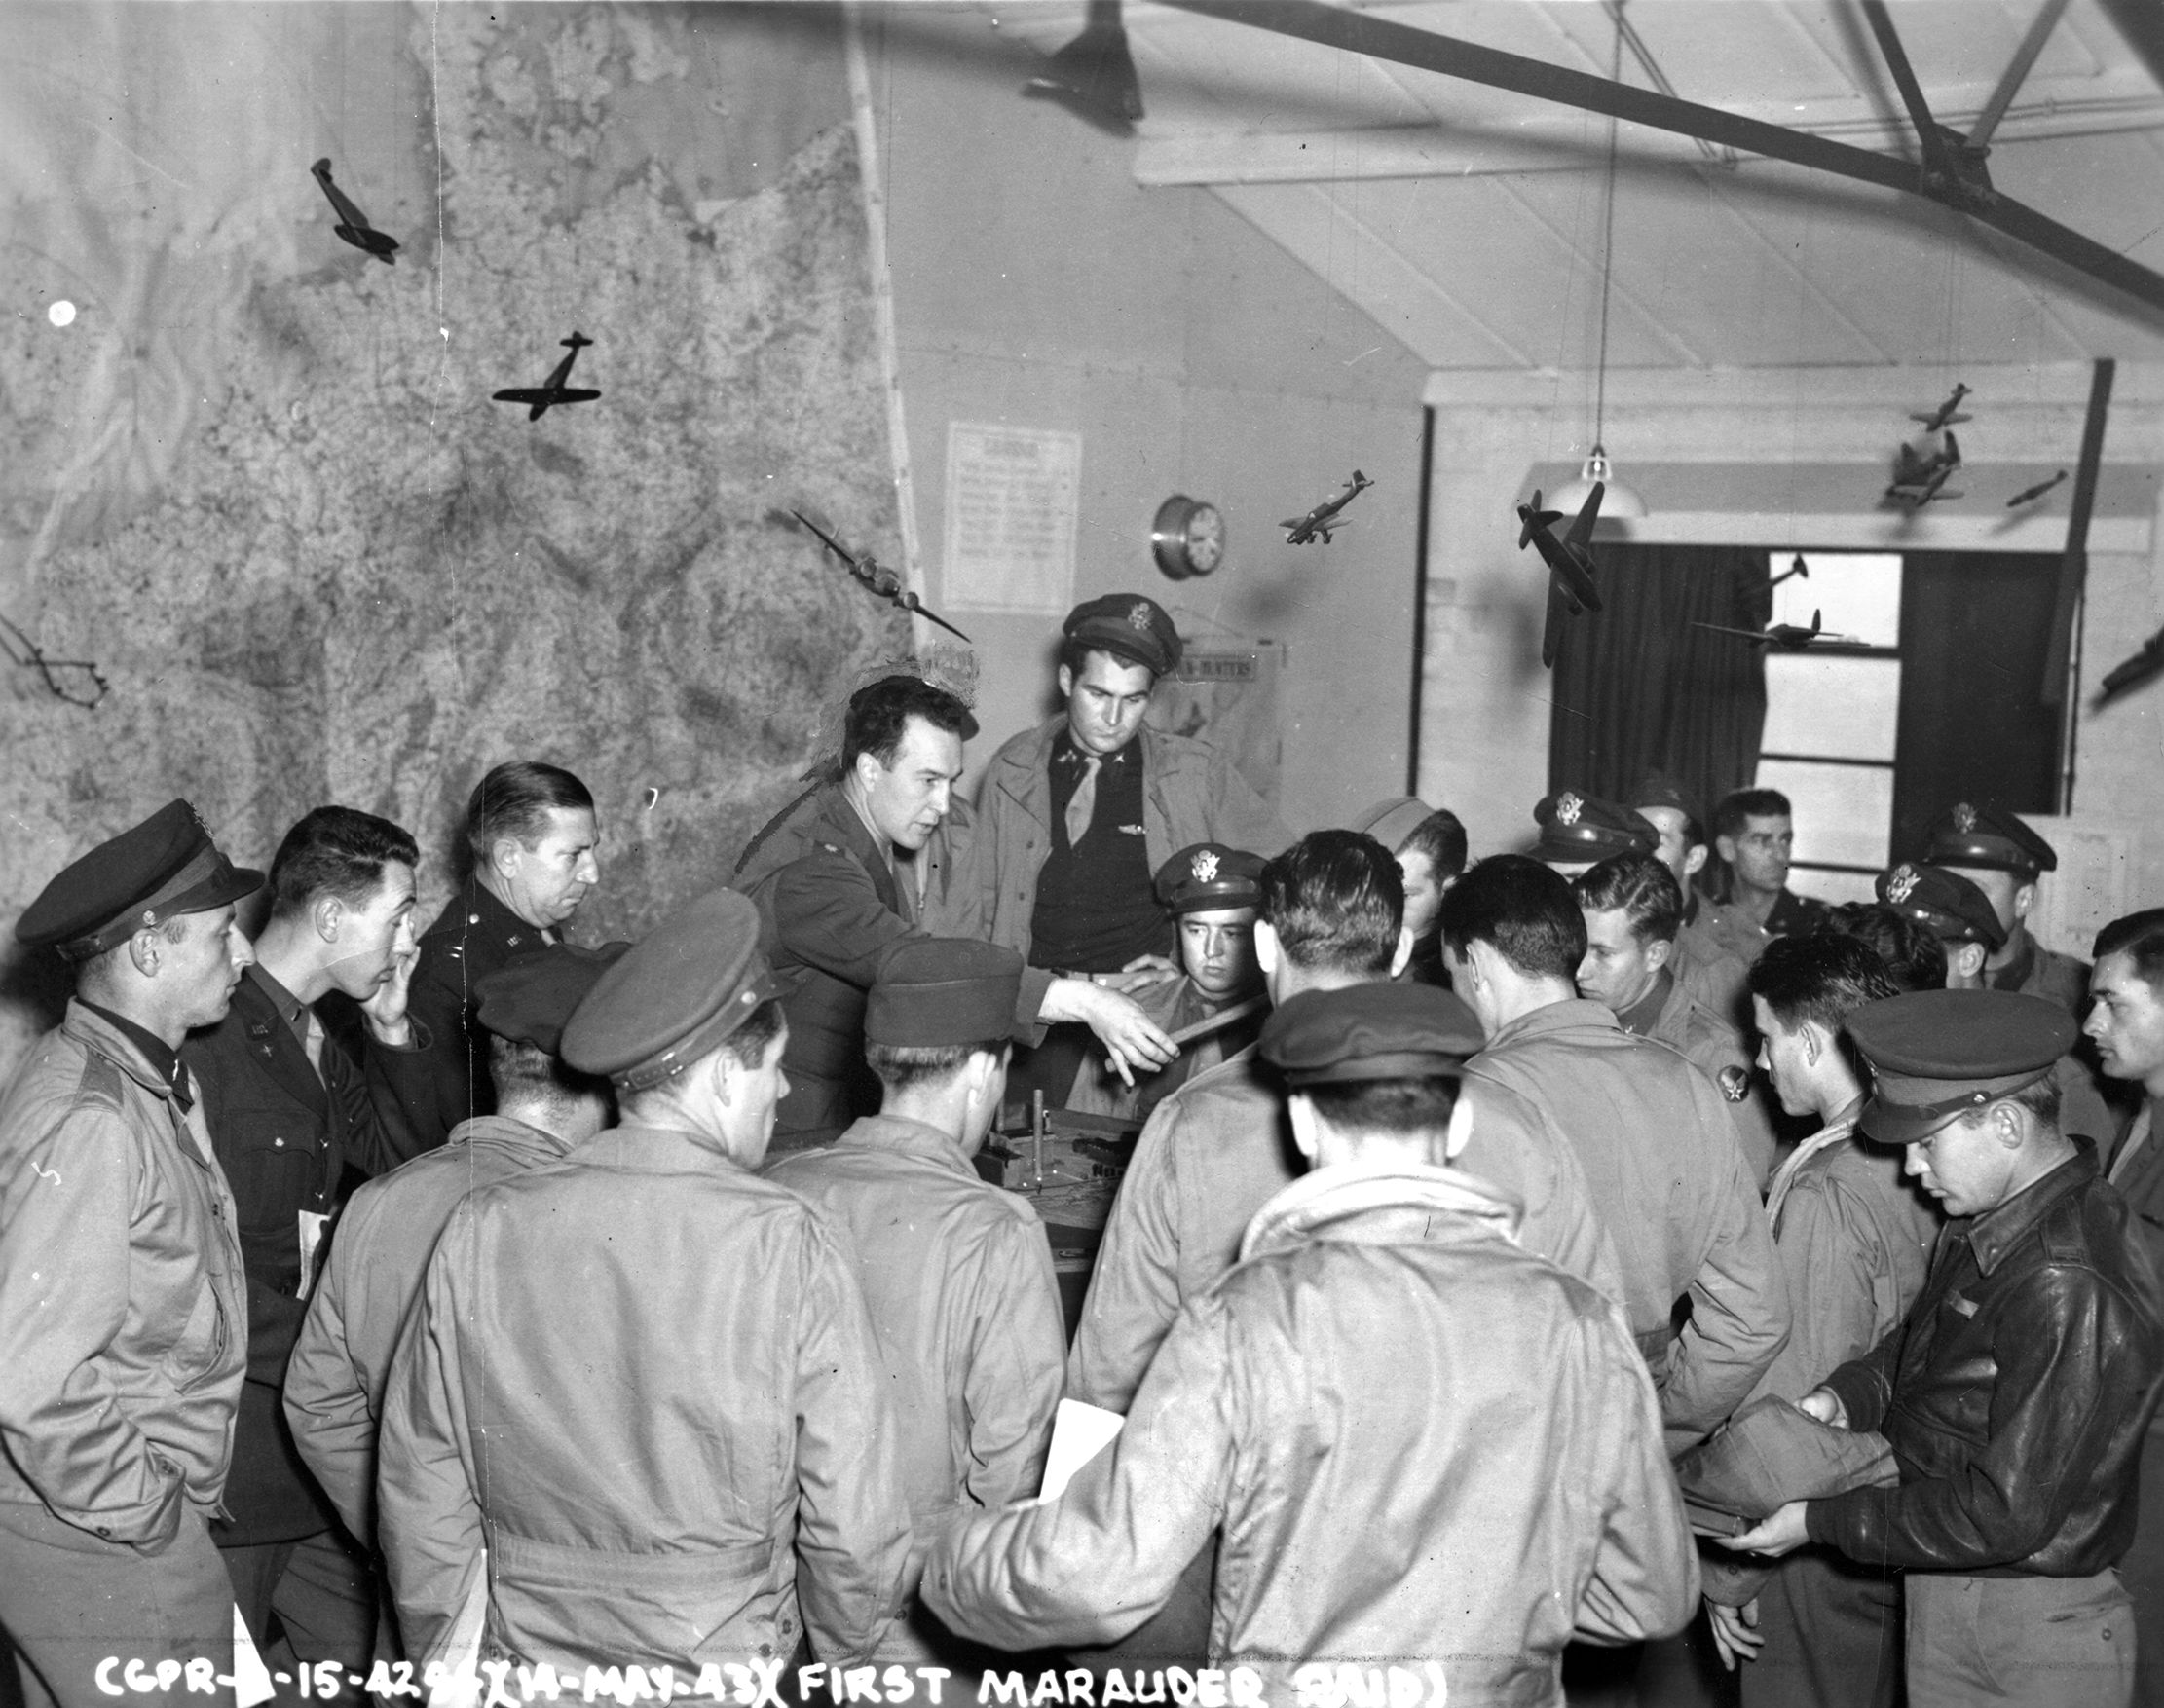 Shown briefing his men, Lt. Col. Robert Stillman, CO of the 322nd Bomb Group, was shot down on the May 17 raid, severely injured, and spent two years in a POW camp. He later became the first commandant of the U.S. Air Force Academy. 